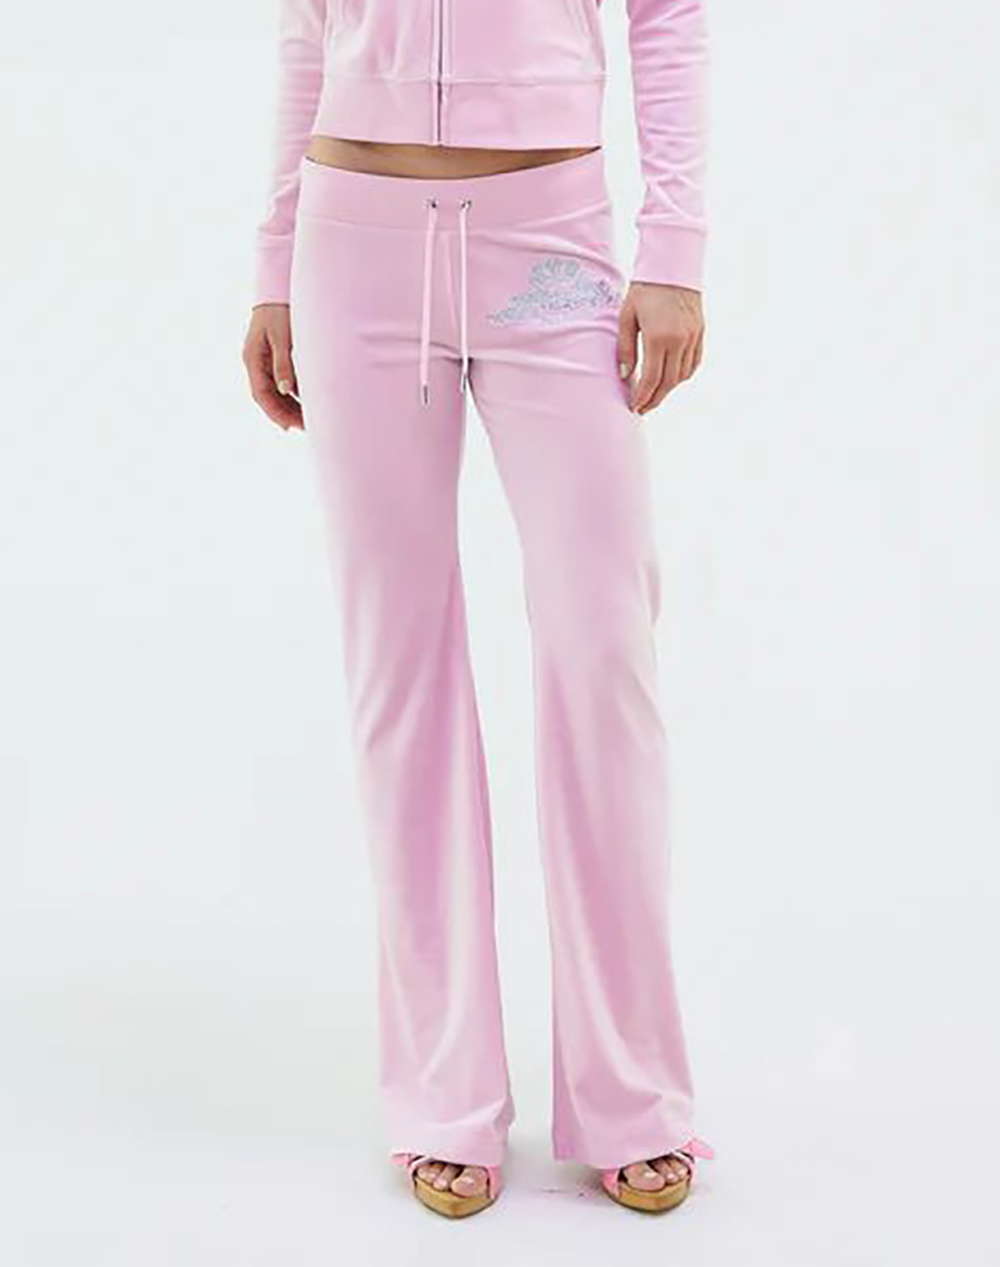 JUICY COUTURE ARCHED METALLIC DEL RAY PANT